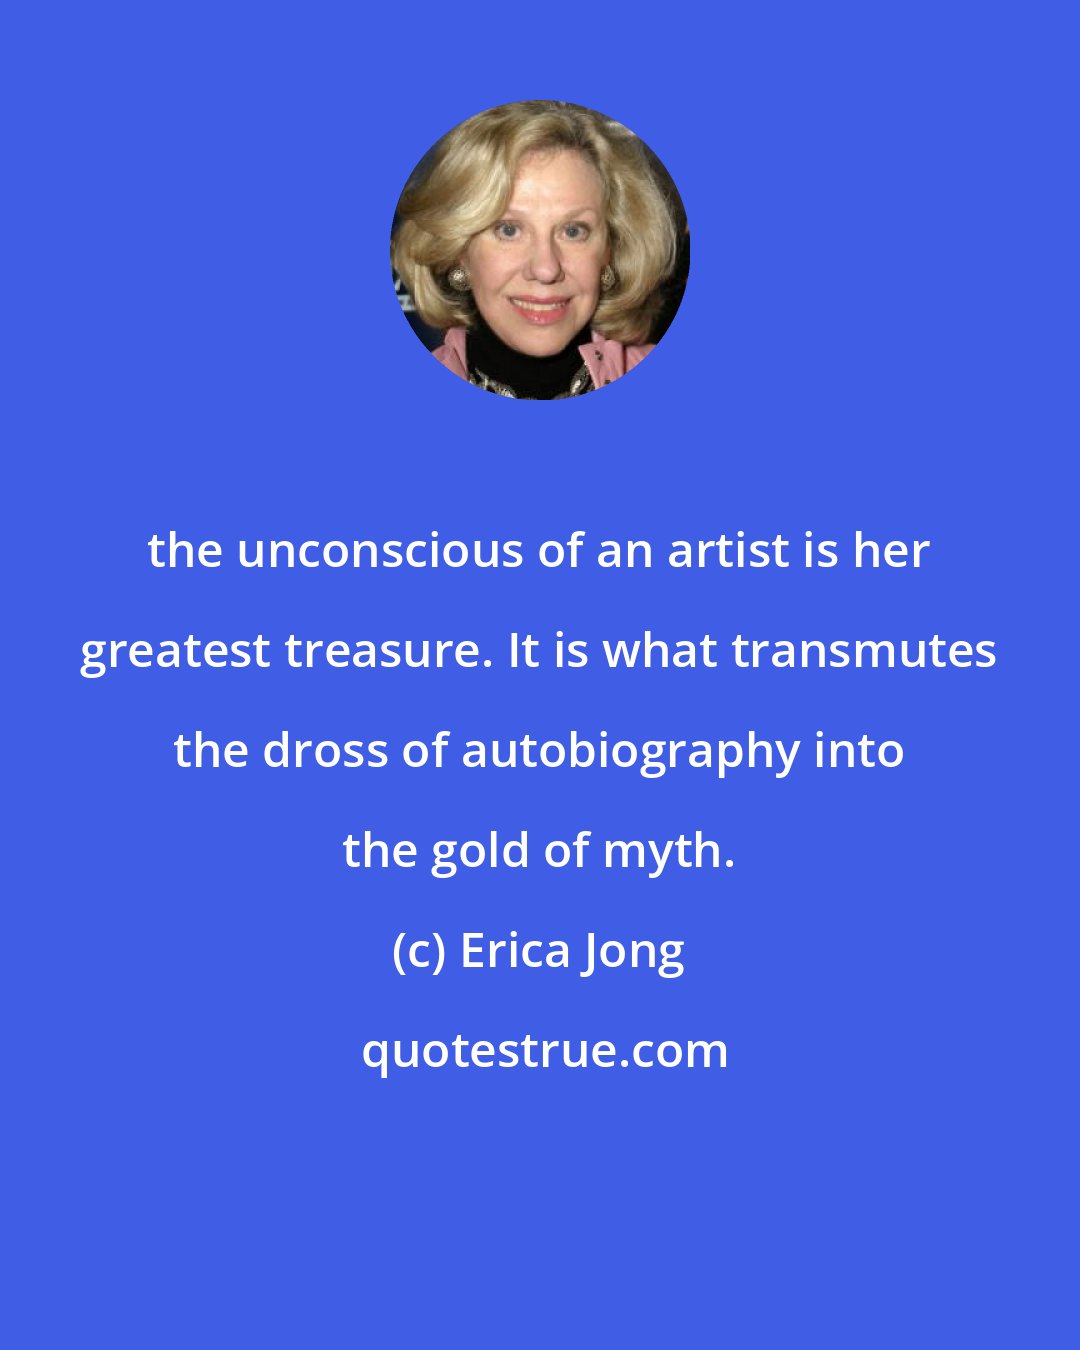 Erica Jong: the unconscious of an artist is her greatest treasure. It is what transmutes the dross of autobiography into the gold of myth.